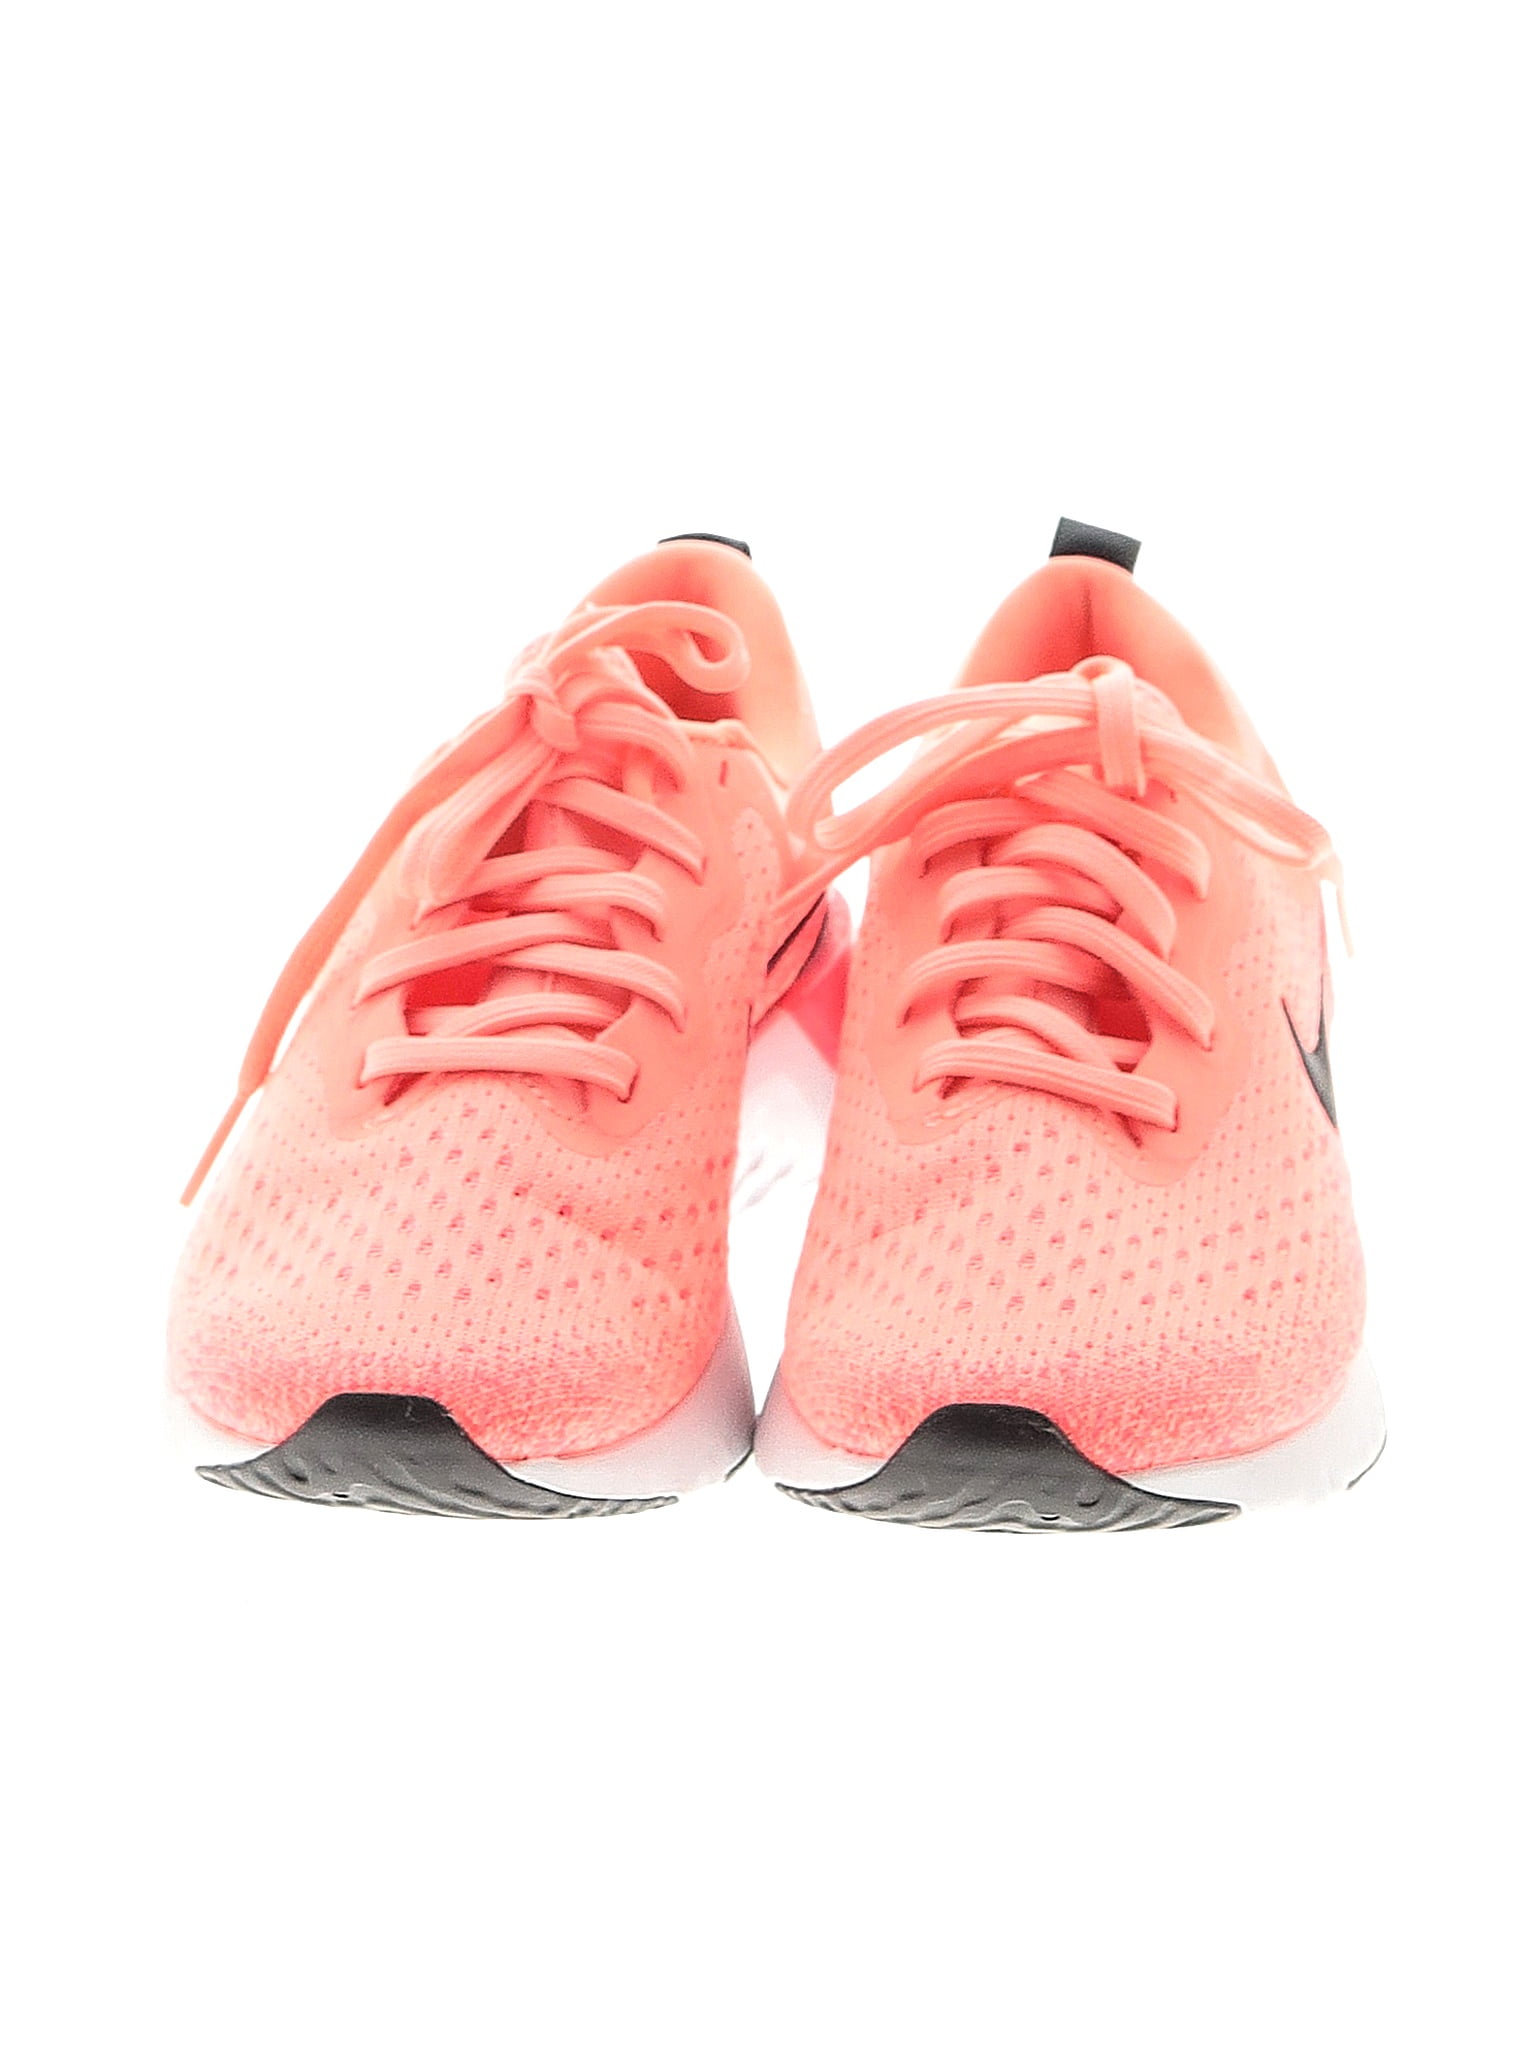 Nike Color Block Pink Sneakers Size 6 1/2 - 57% off